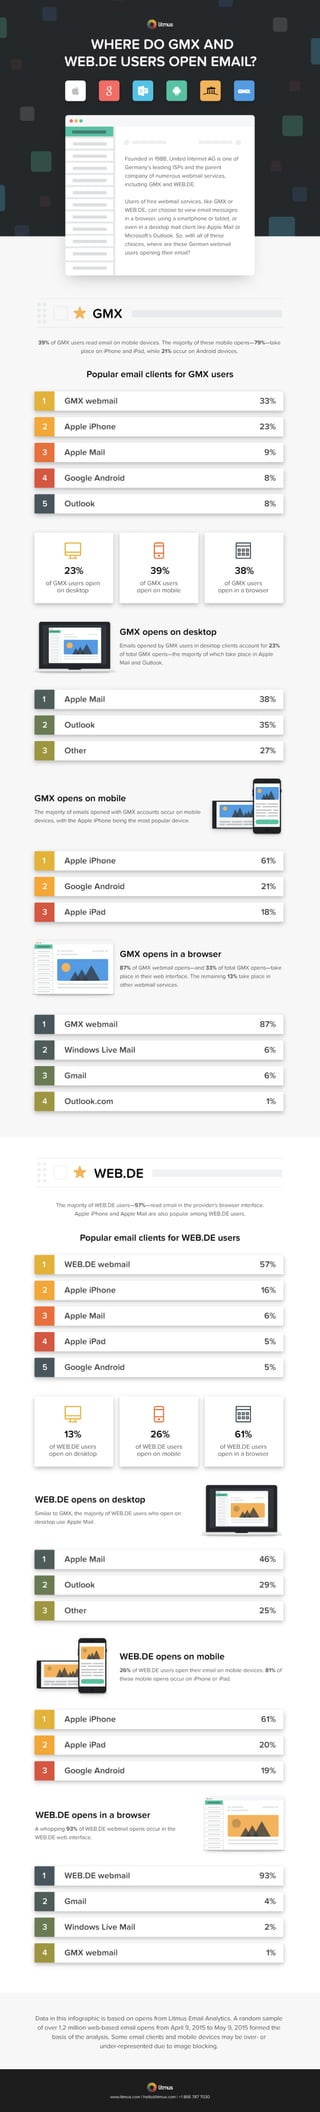 Where do GMX and WEB.DE users open email? [Infographic]